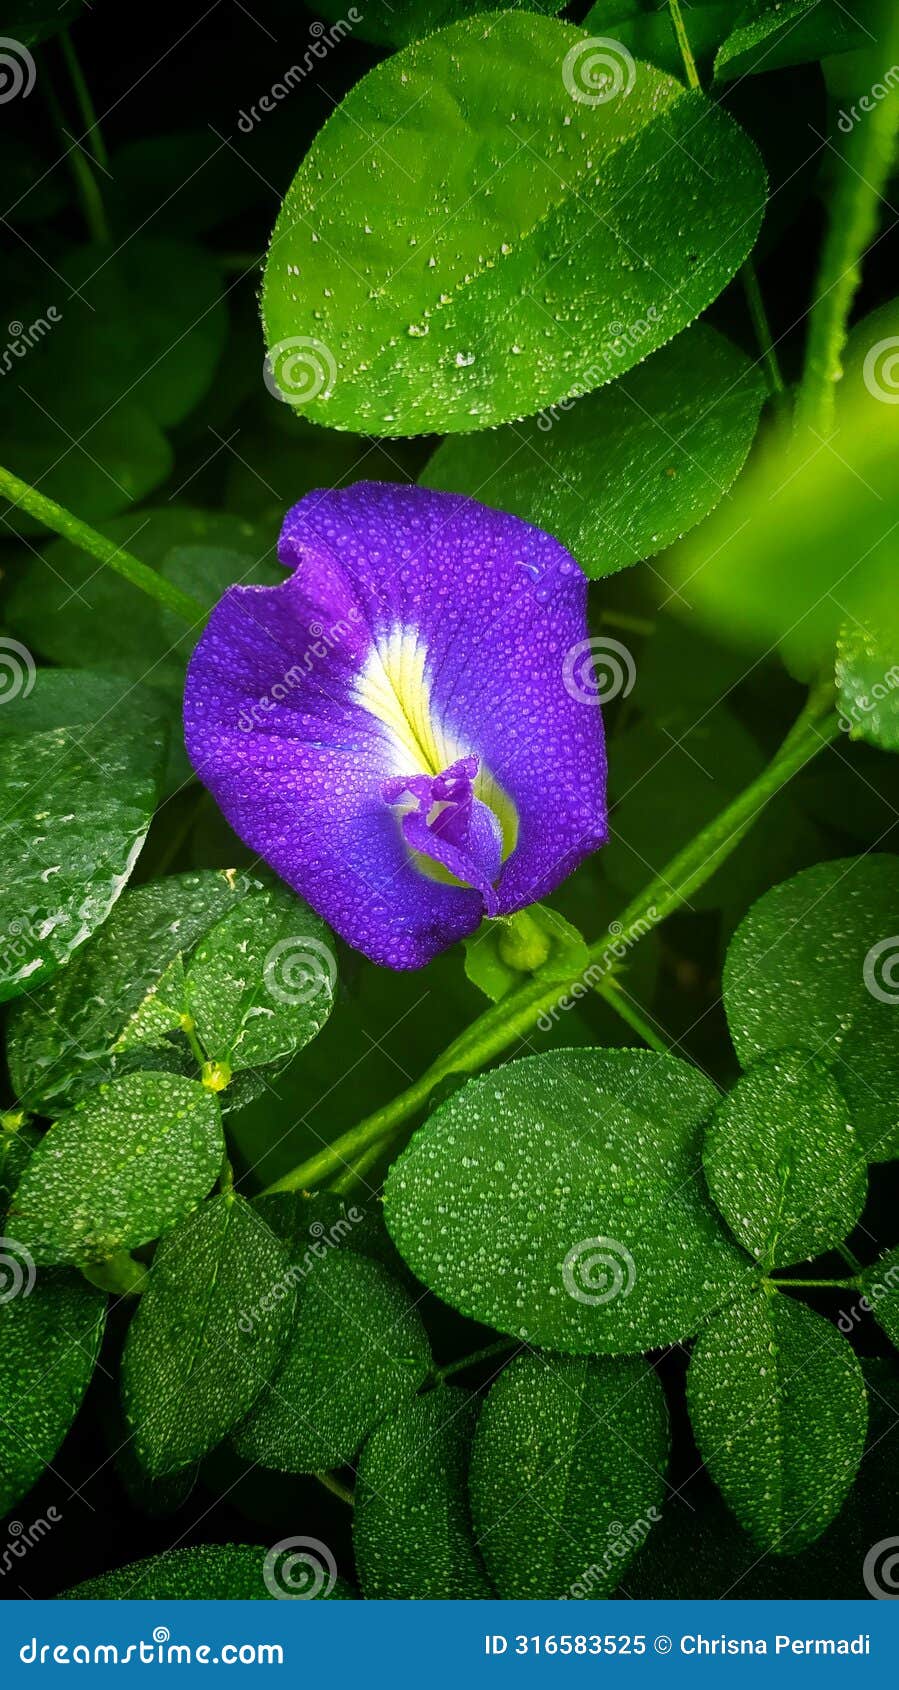 clitoria ternatea is an endemic plant species native to the indonesian island of ternate which belongs to the fabaceae family